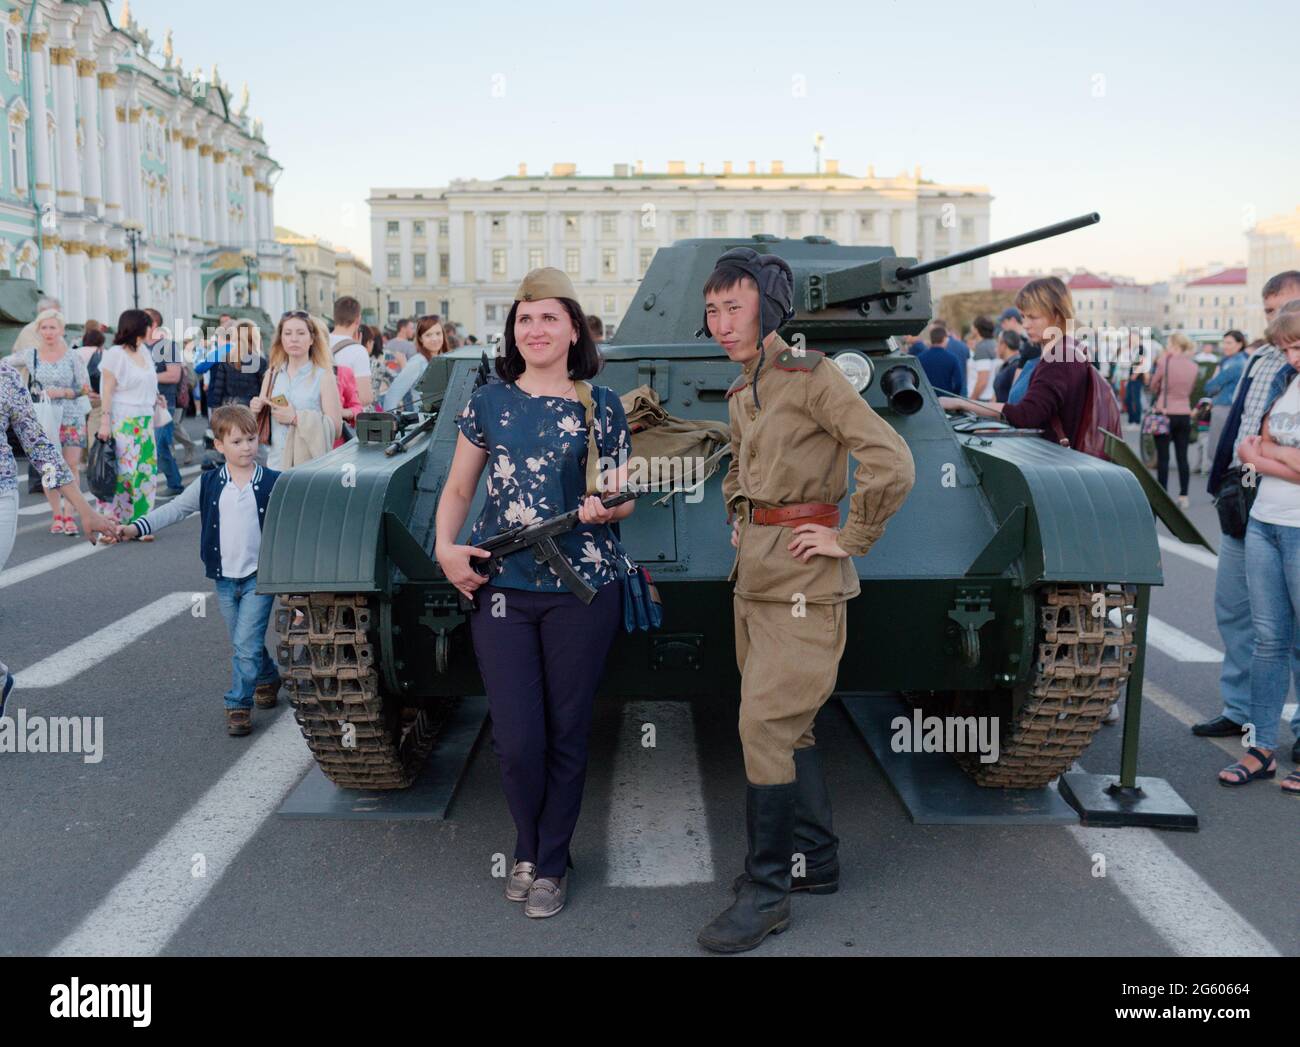 St. Petersburg, Russia, 9th August, 2017: People with retro submachine gun posing against a retro tank on Palace square during the parade-exhibition of military equipment dedicated to the anniversary of the ending of battle for Leningrad in 1944 Stock Photo